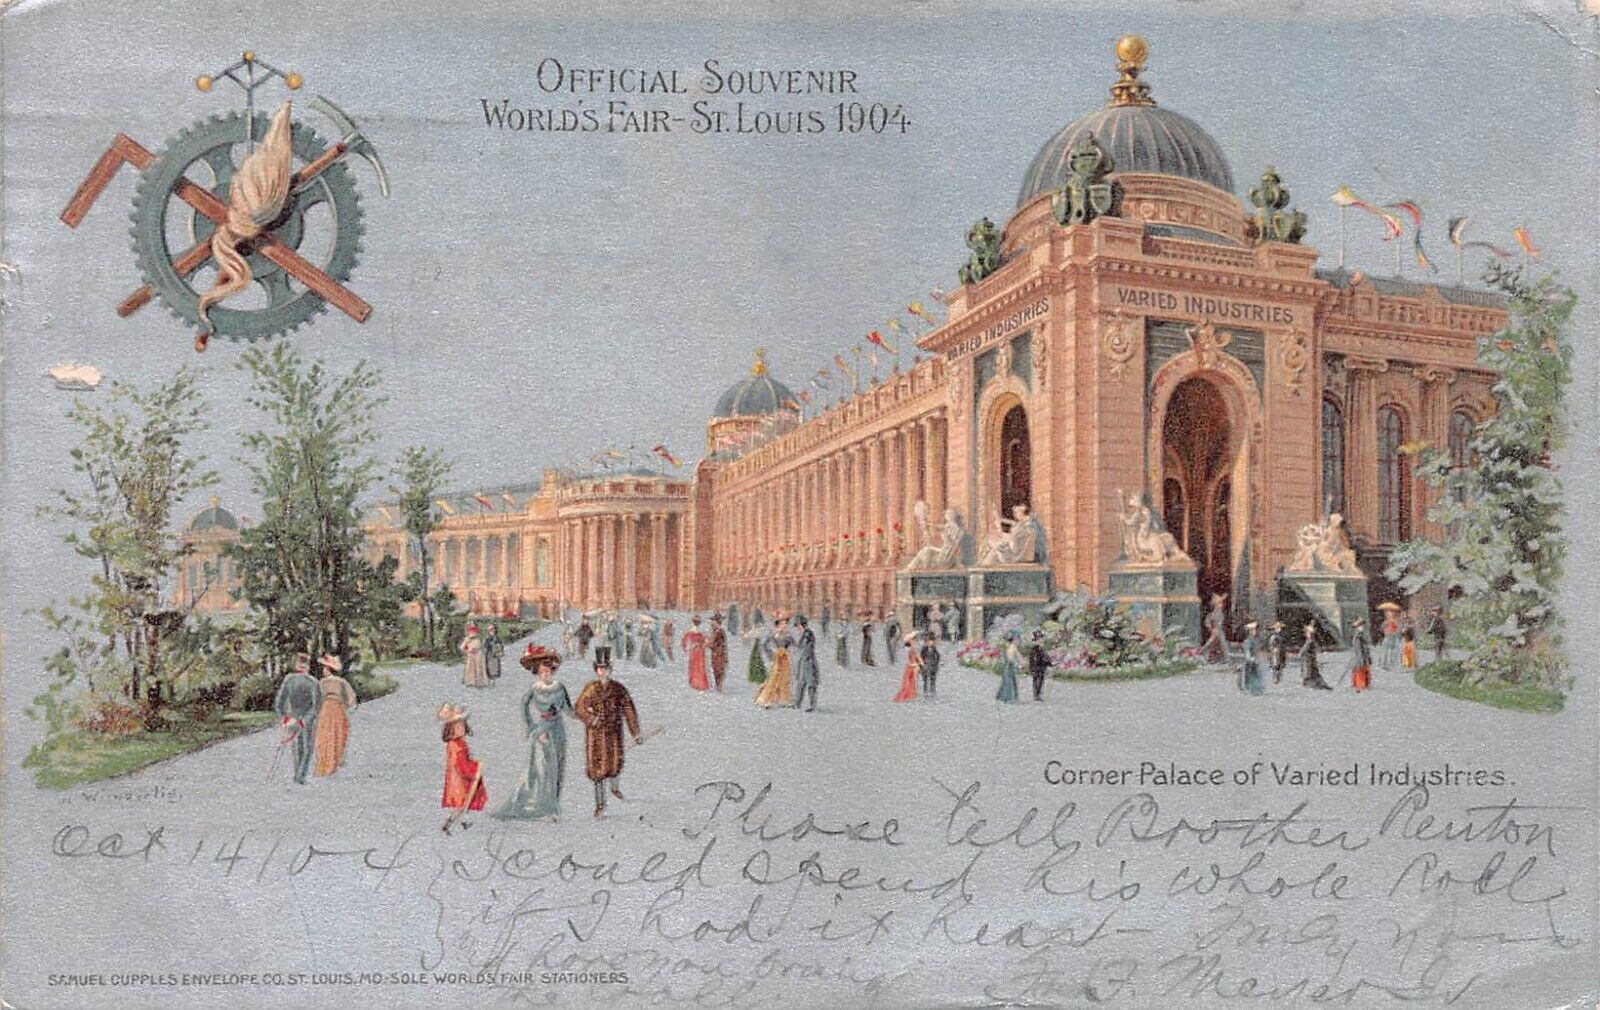 St. Louis 1904 World's Fair, Official Postcard, Used in 1904, Samuel Cupples Co.